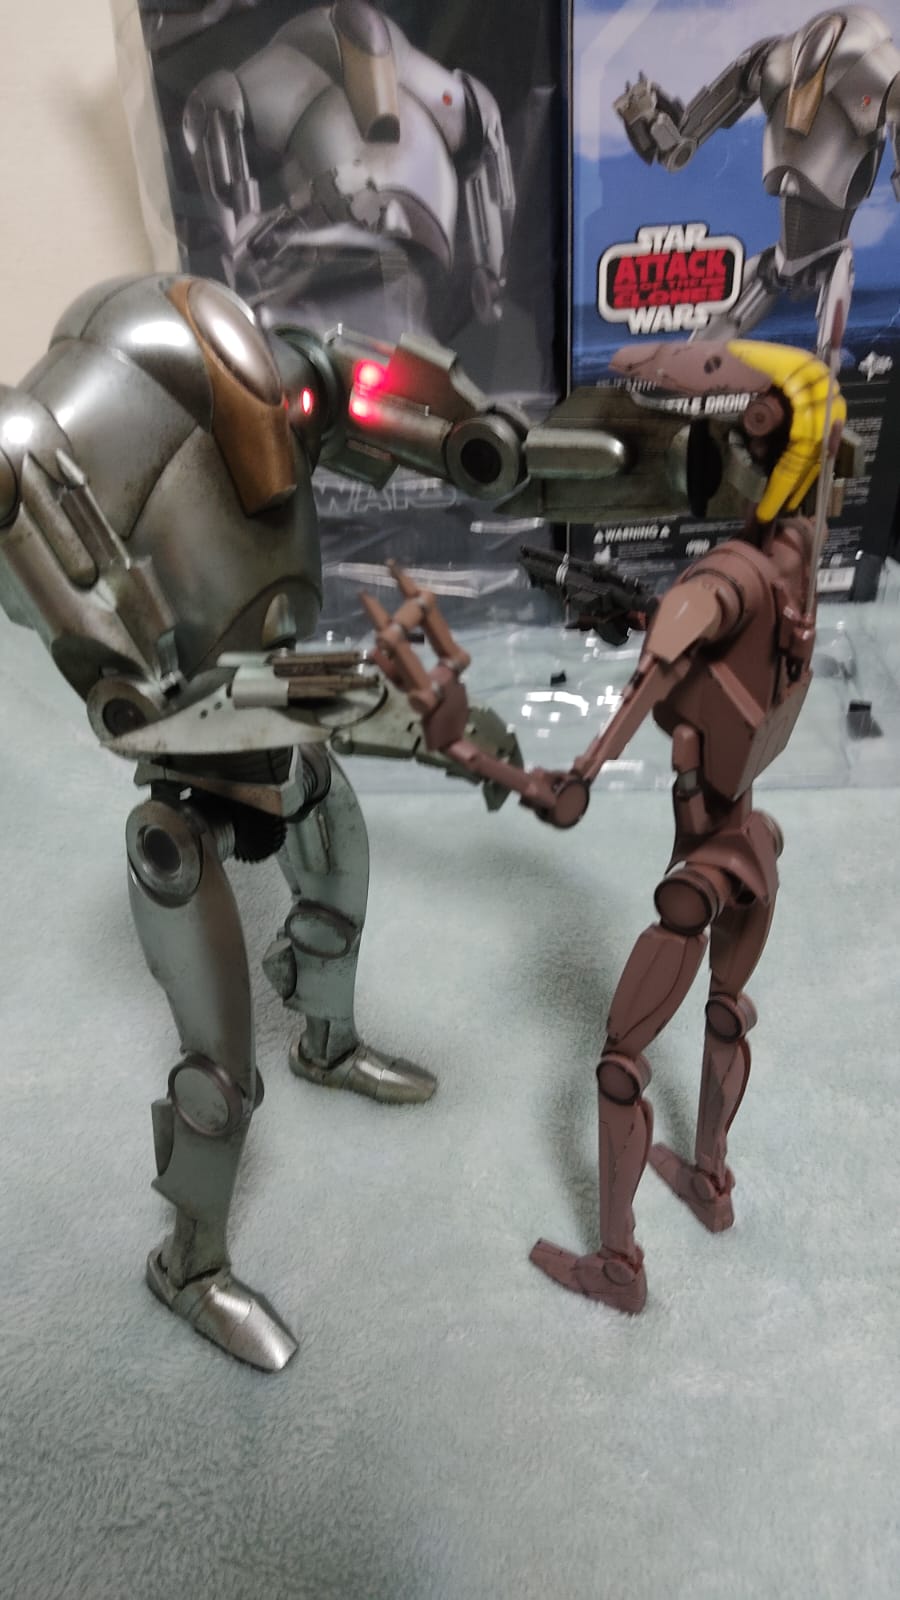 movie - NEW PRODUCT: HOT TOYS: STAR WARS EPISODE II: ATTACK OF THE CLONES™ SUPER BATTLE DROID™ 1/6TH SCALE COLLECTIBLE FIGURE Whats168